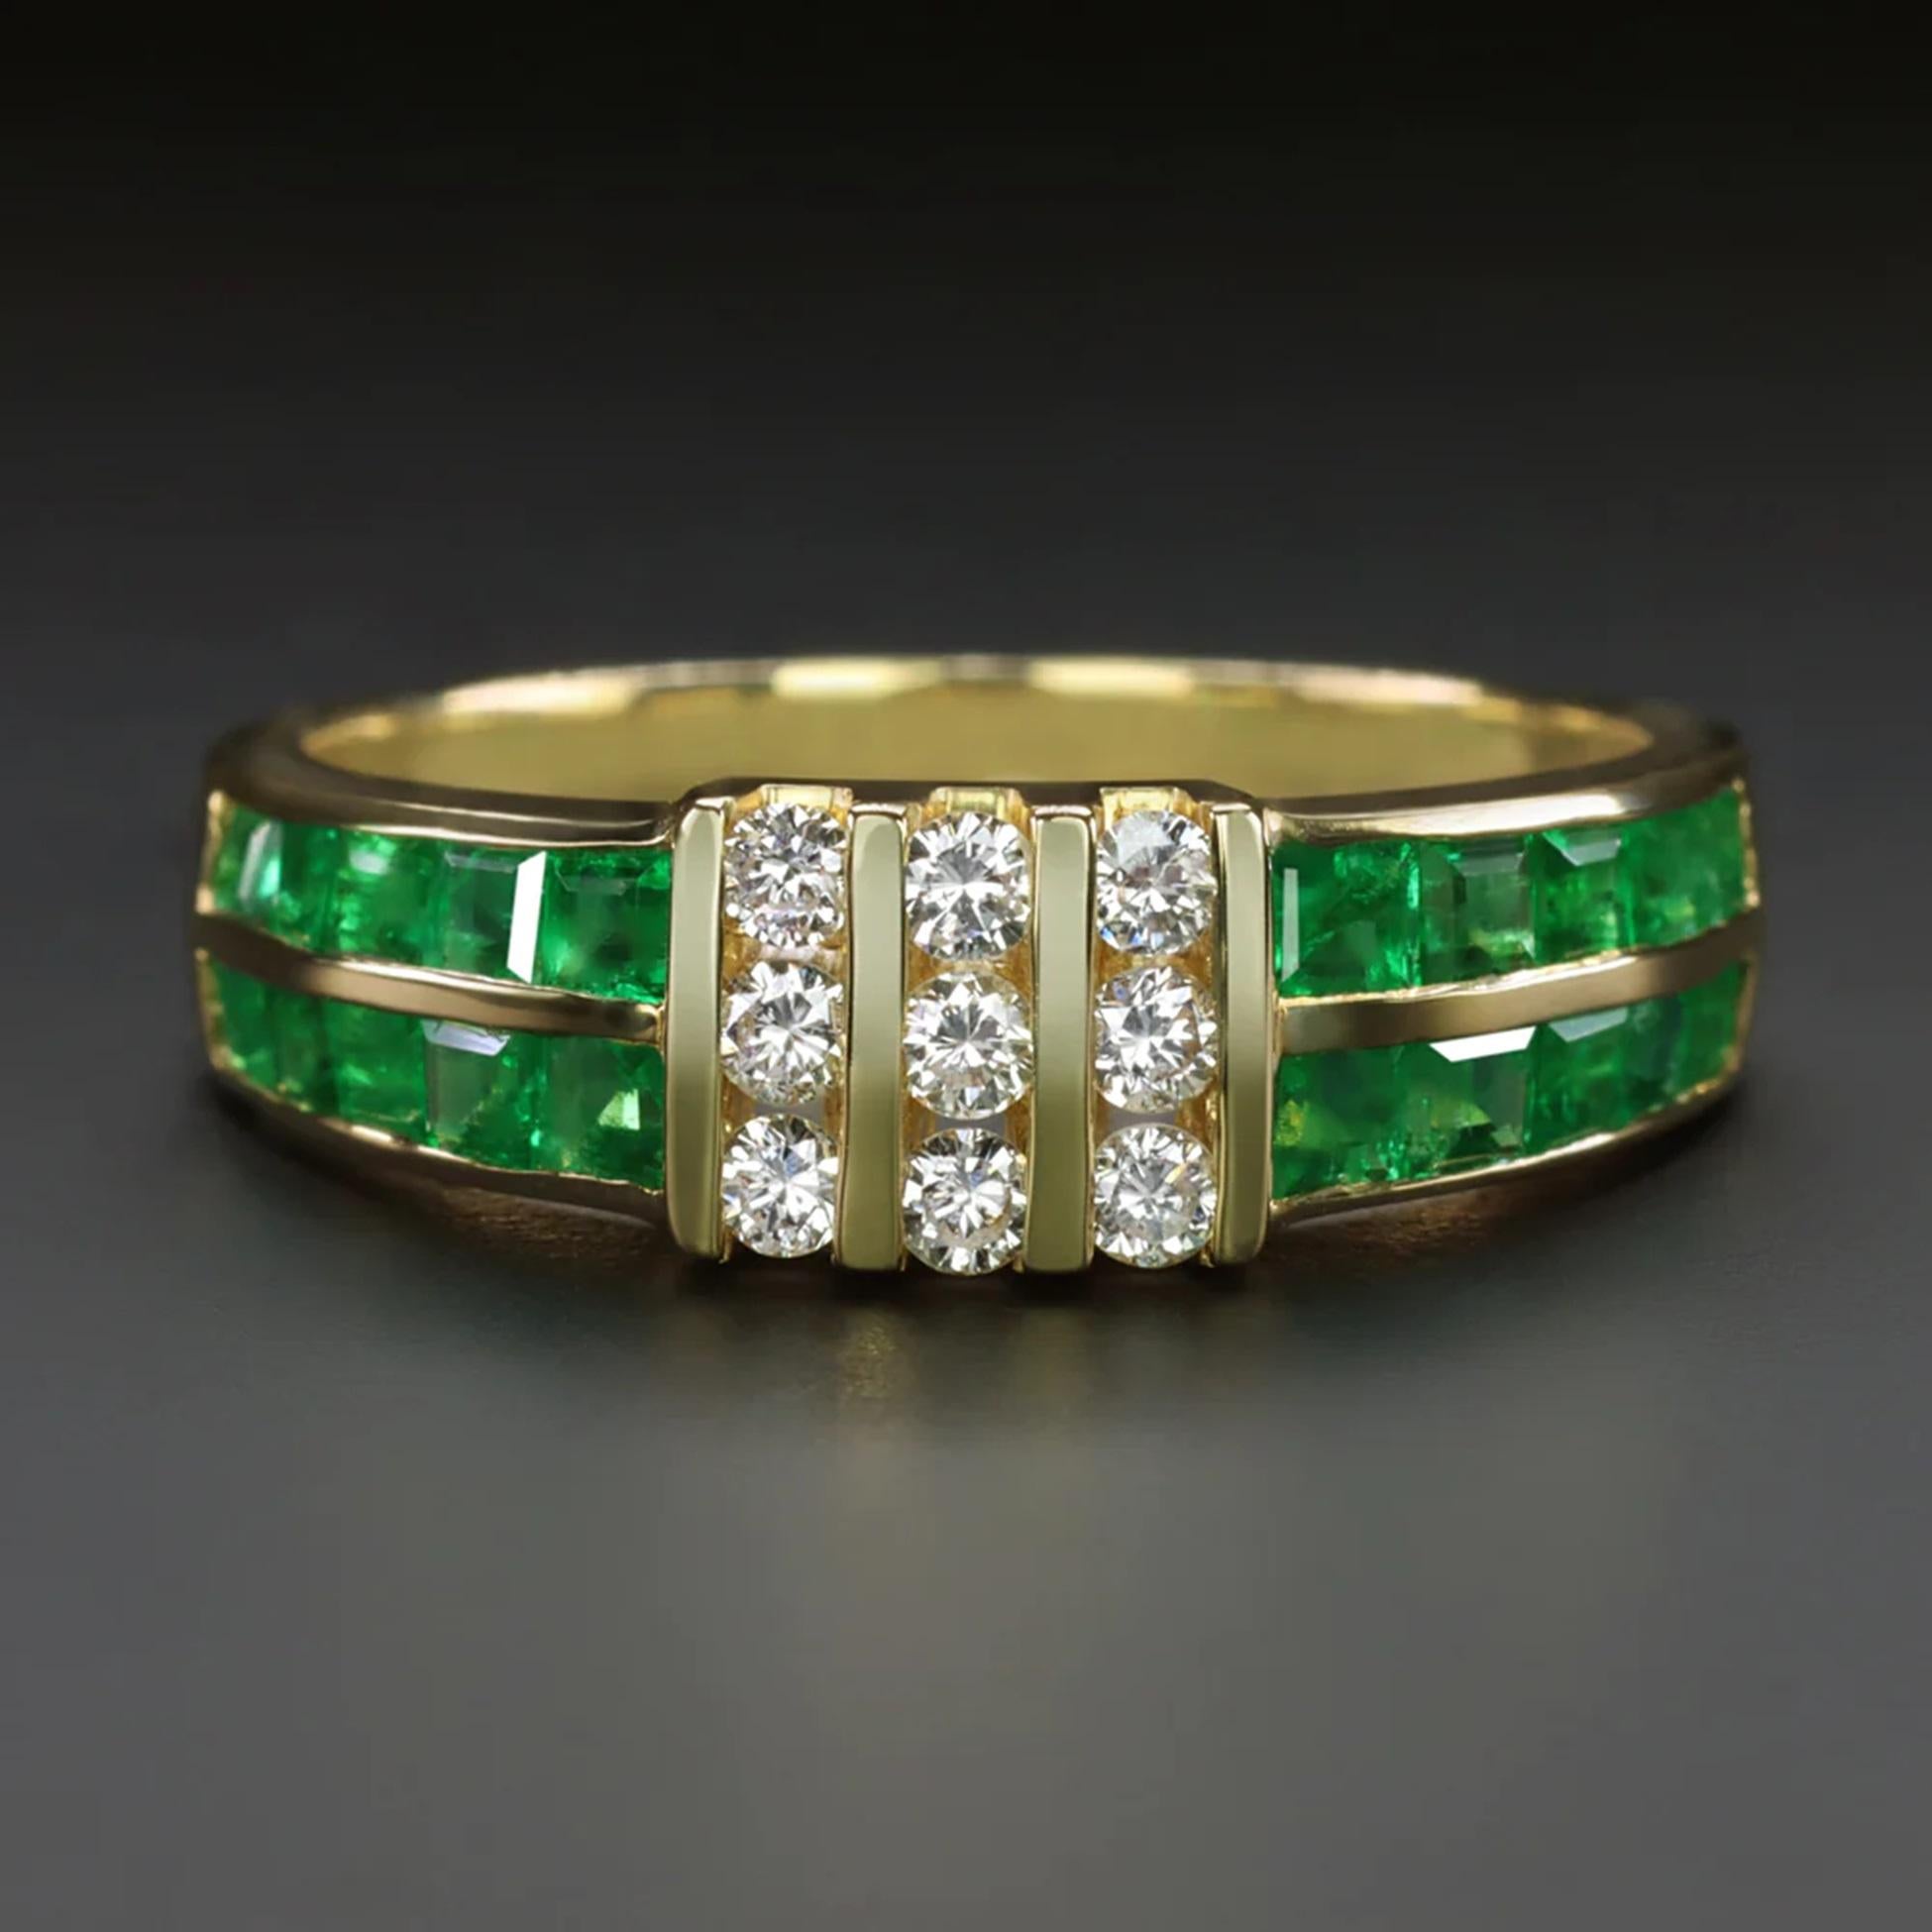 This emerald and diamond band offers a bold and luxurious design with rich pops of green punctuated by bright sparkle.

Highlights:

- 1.10ct of rich green natural emeralds

- 0.25ct of white and eye clean diamonds

- Chunky yellow gold channel